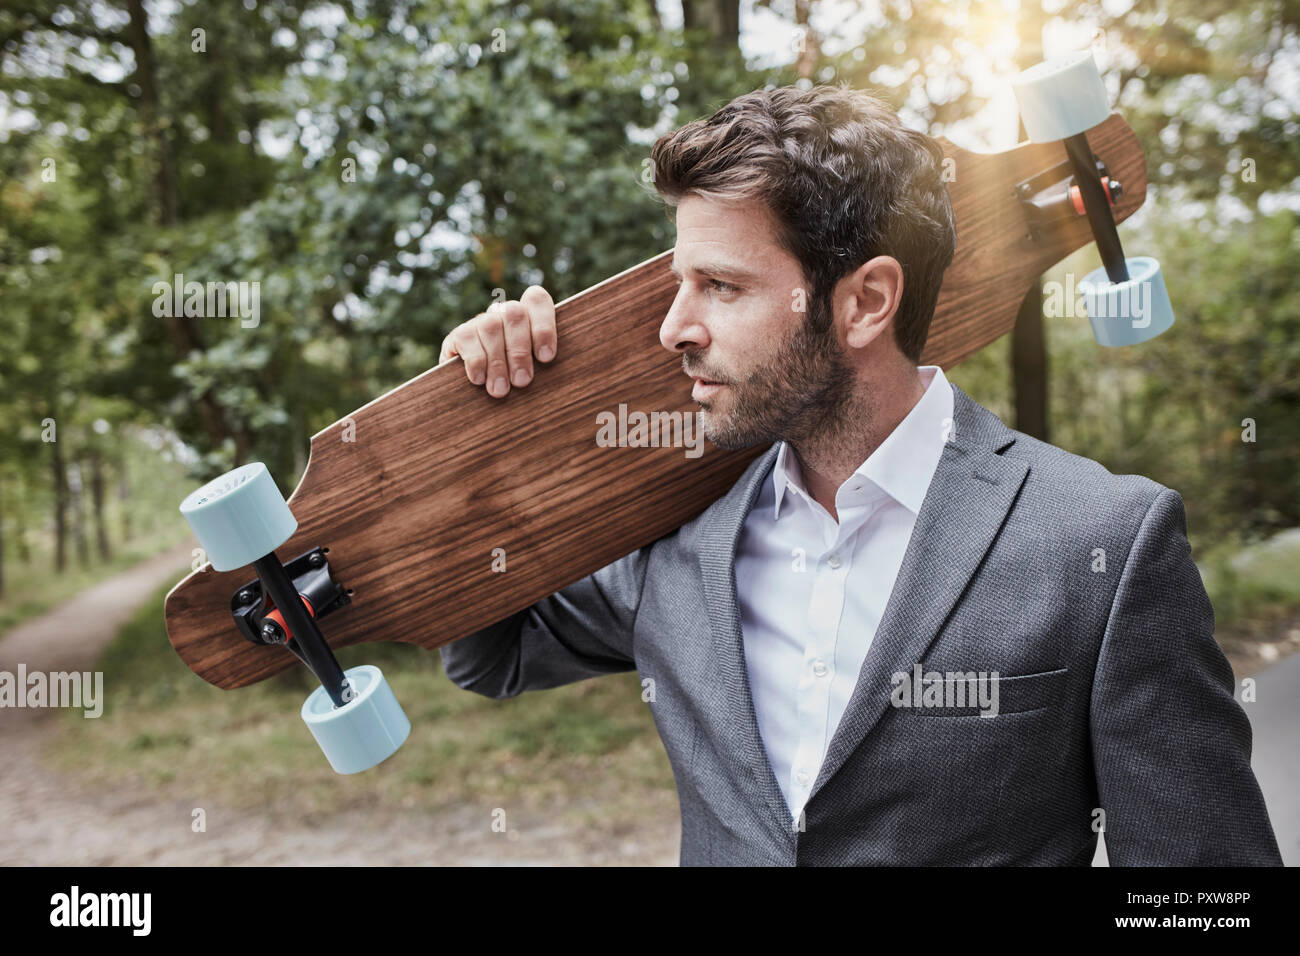 Portrait of businessman carrying skateboard on rural road Stock Photo